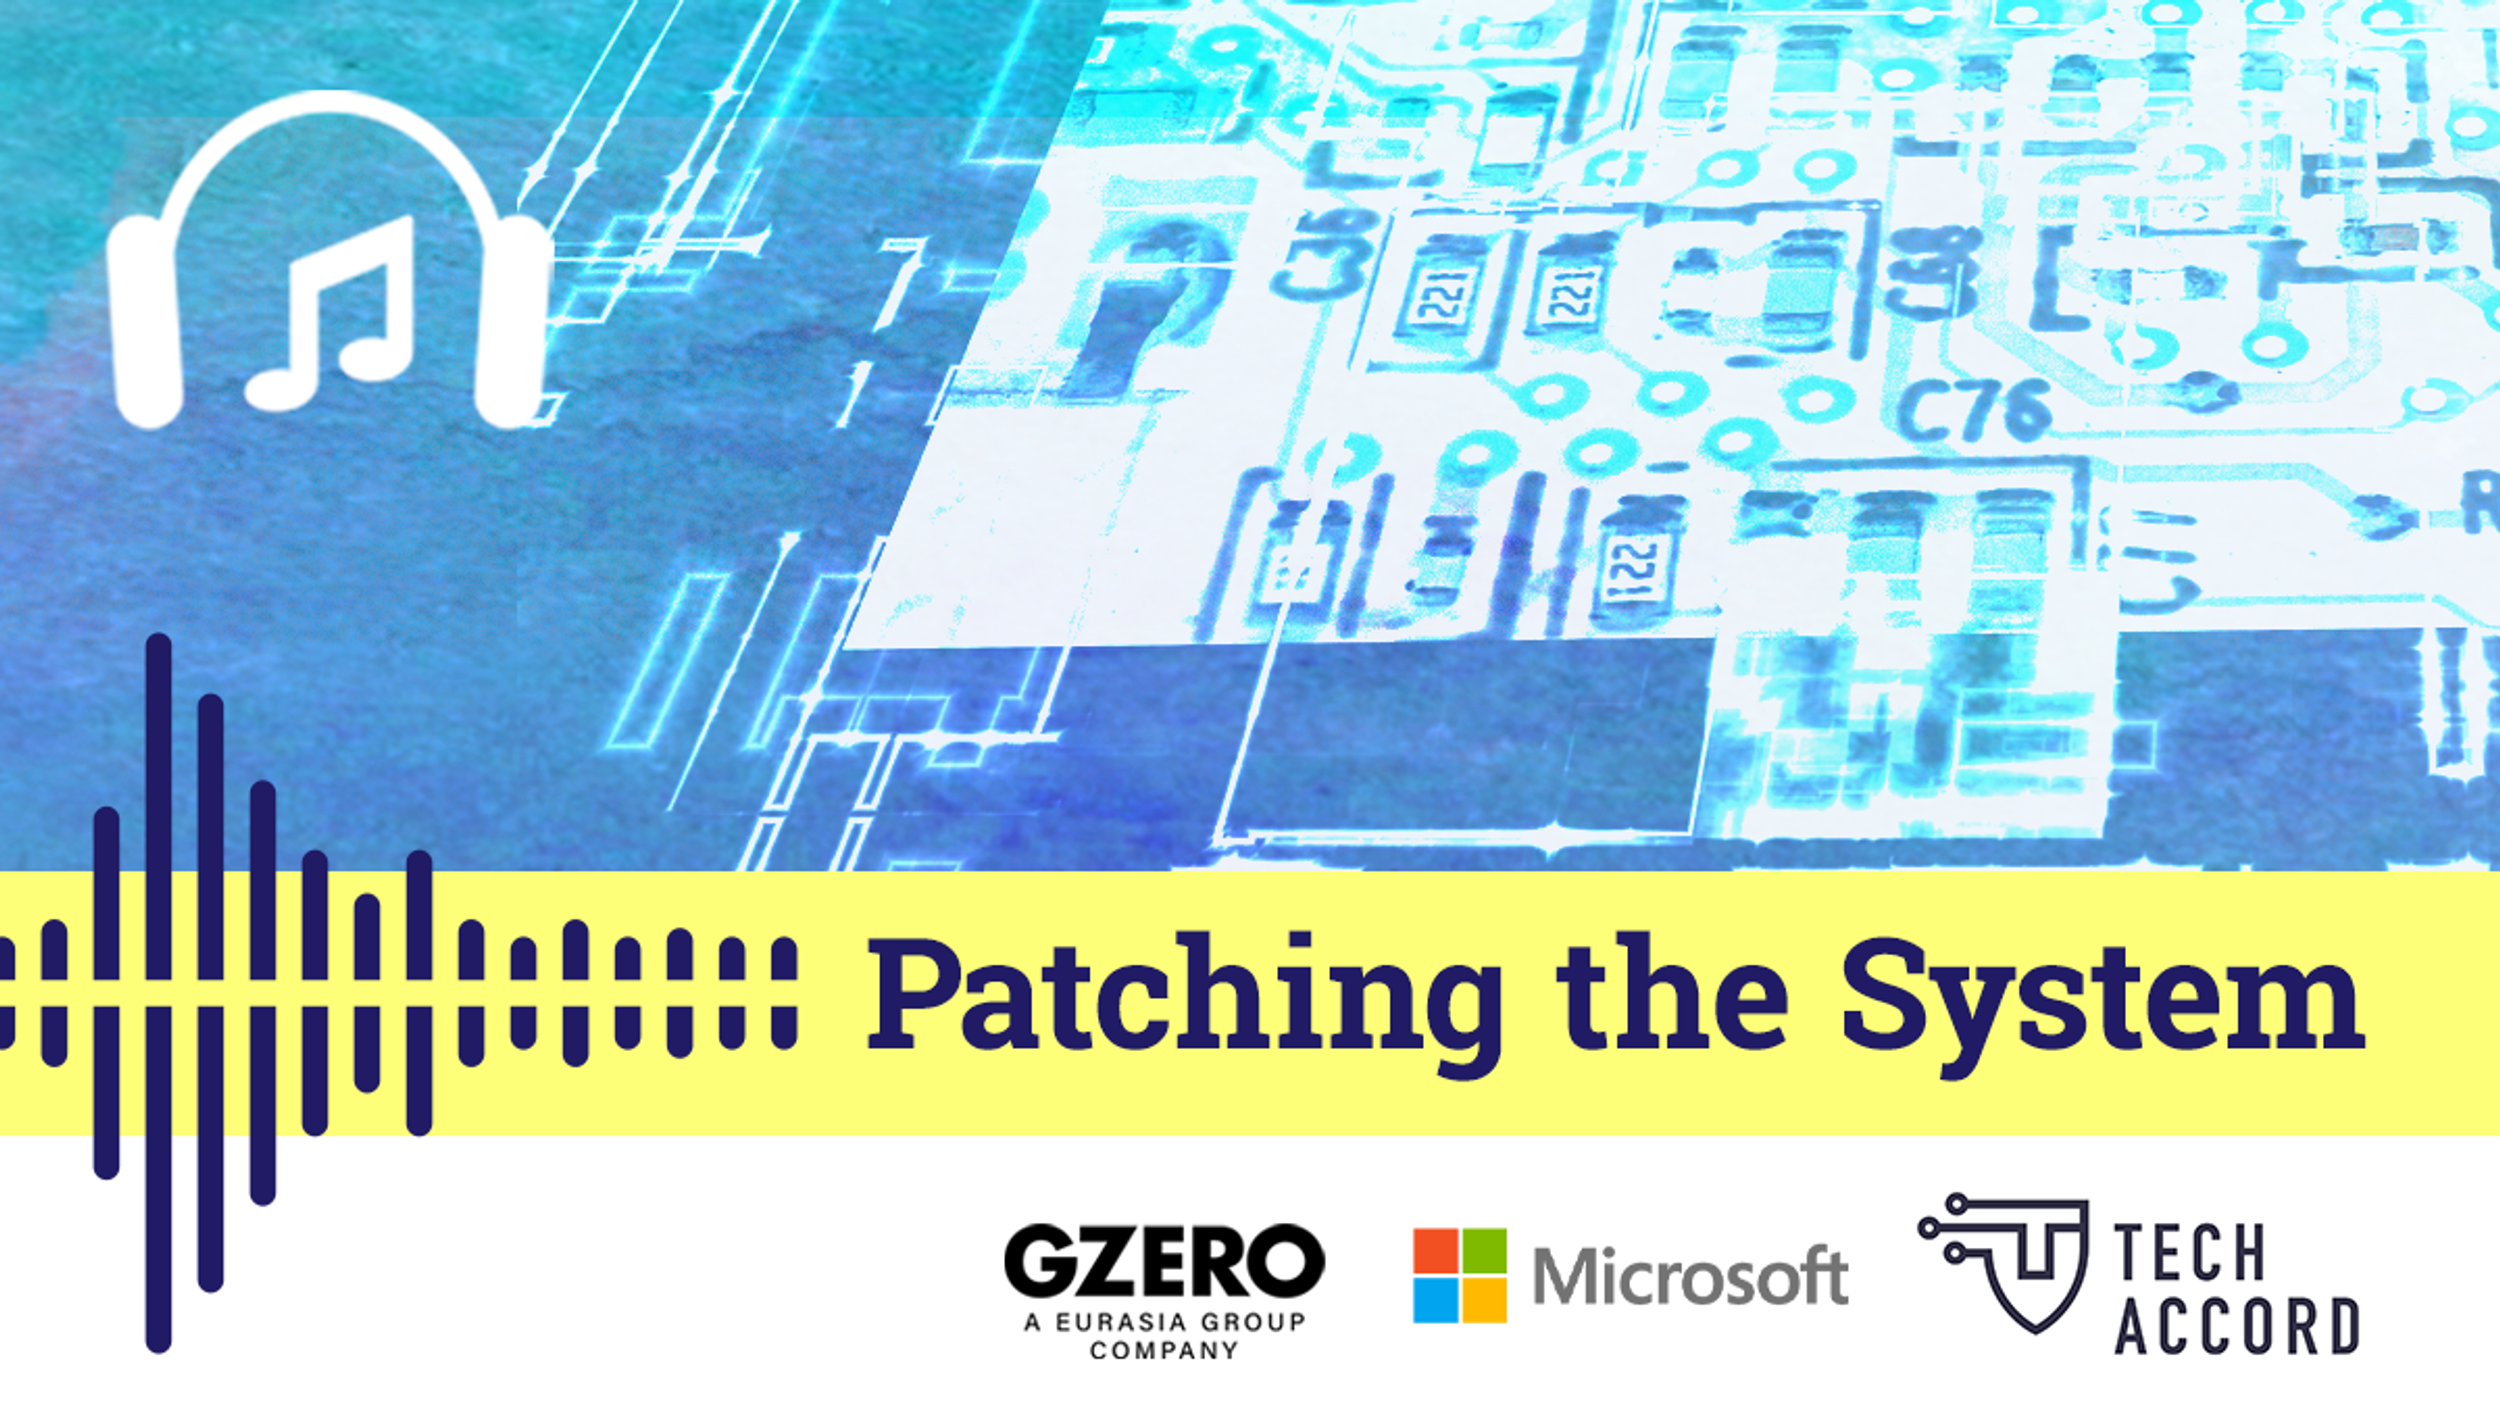 Patching the System, a new podcast series